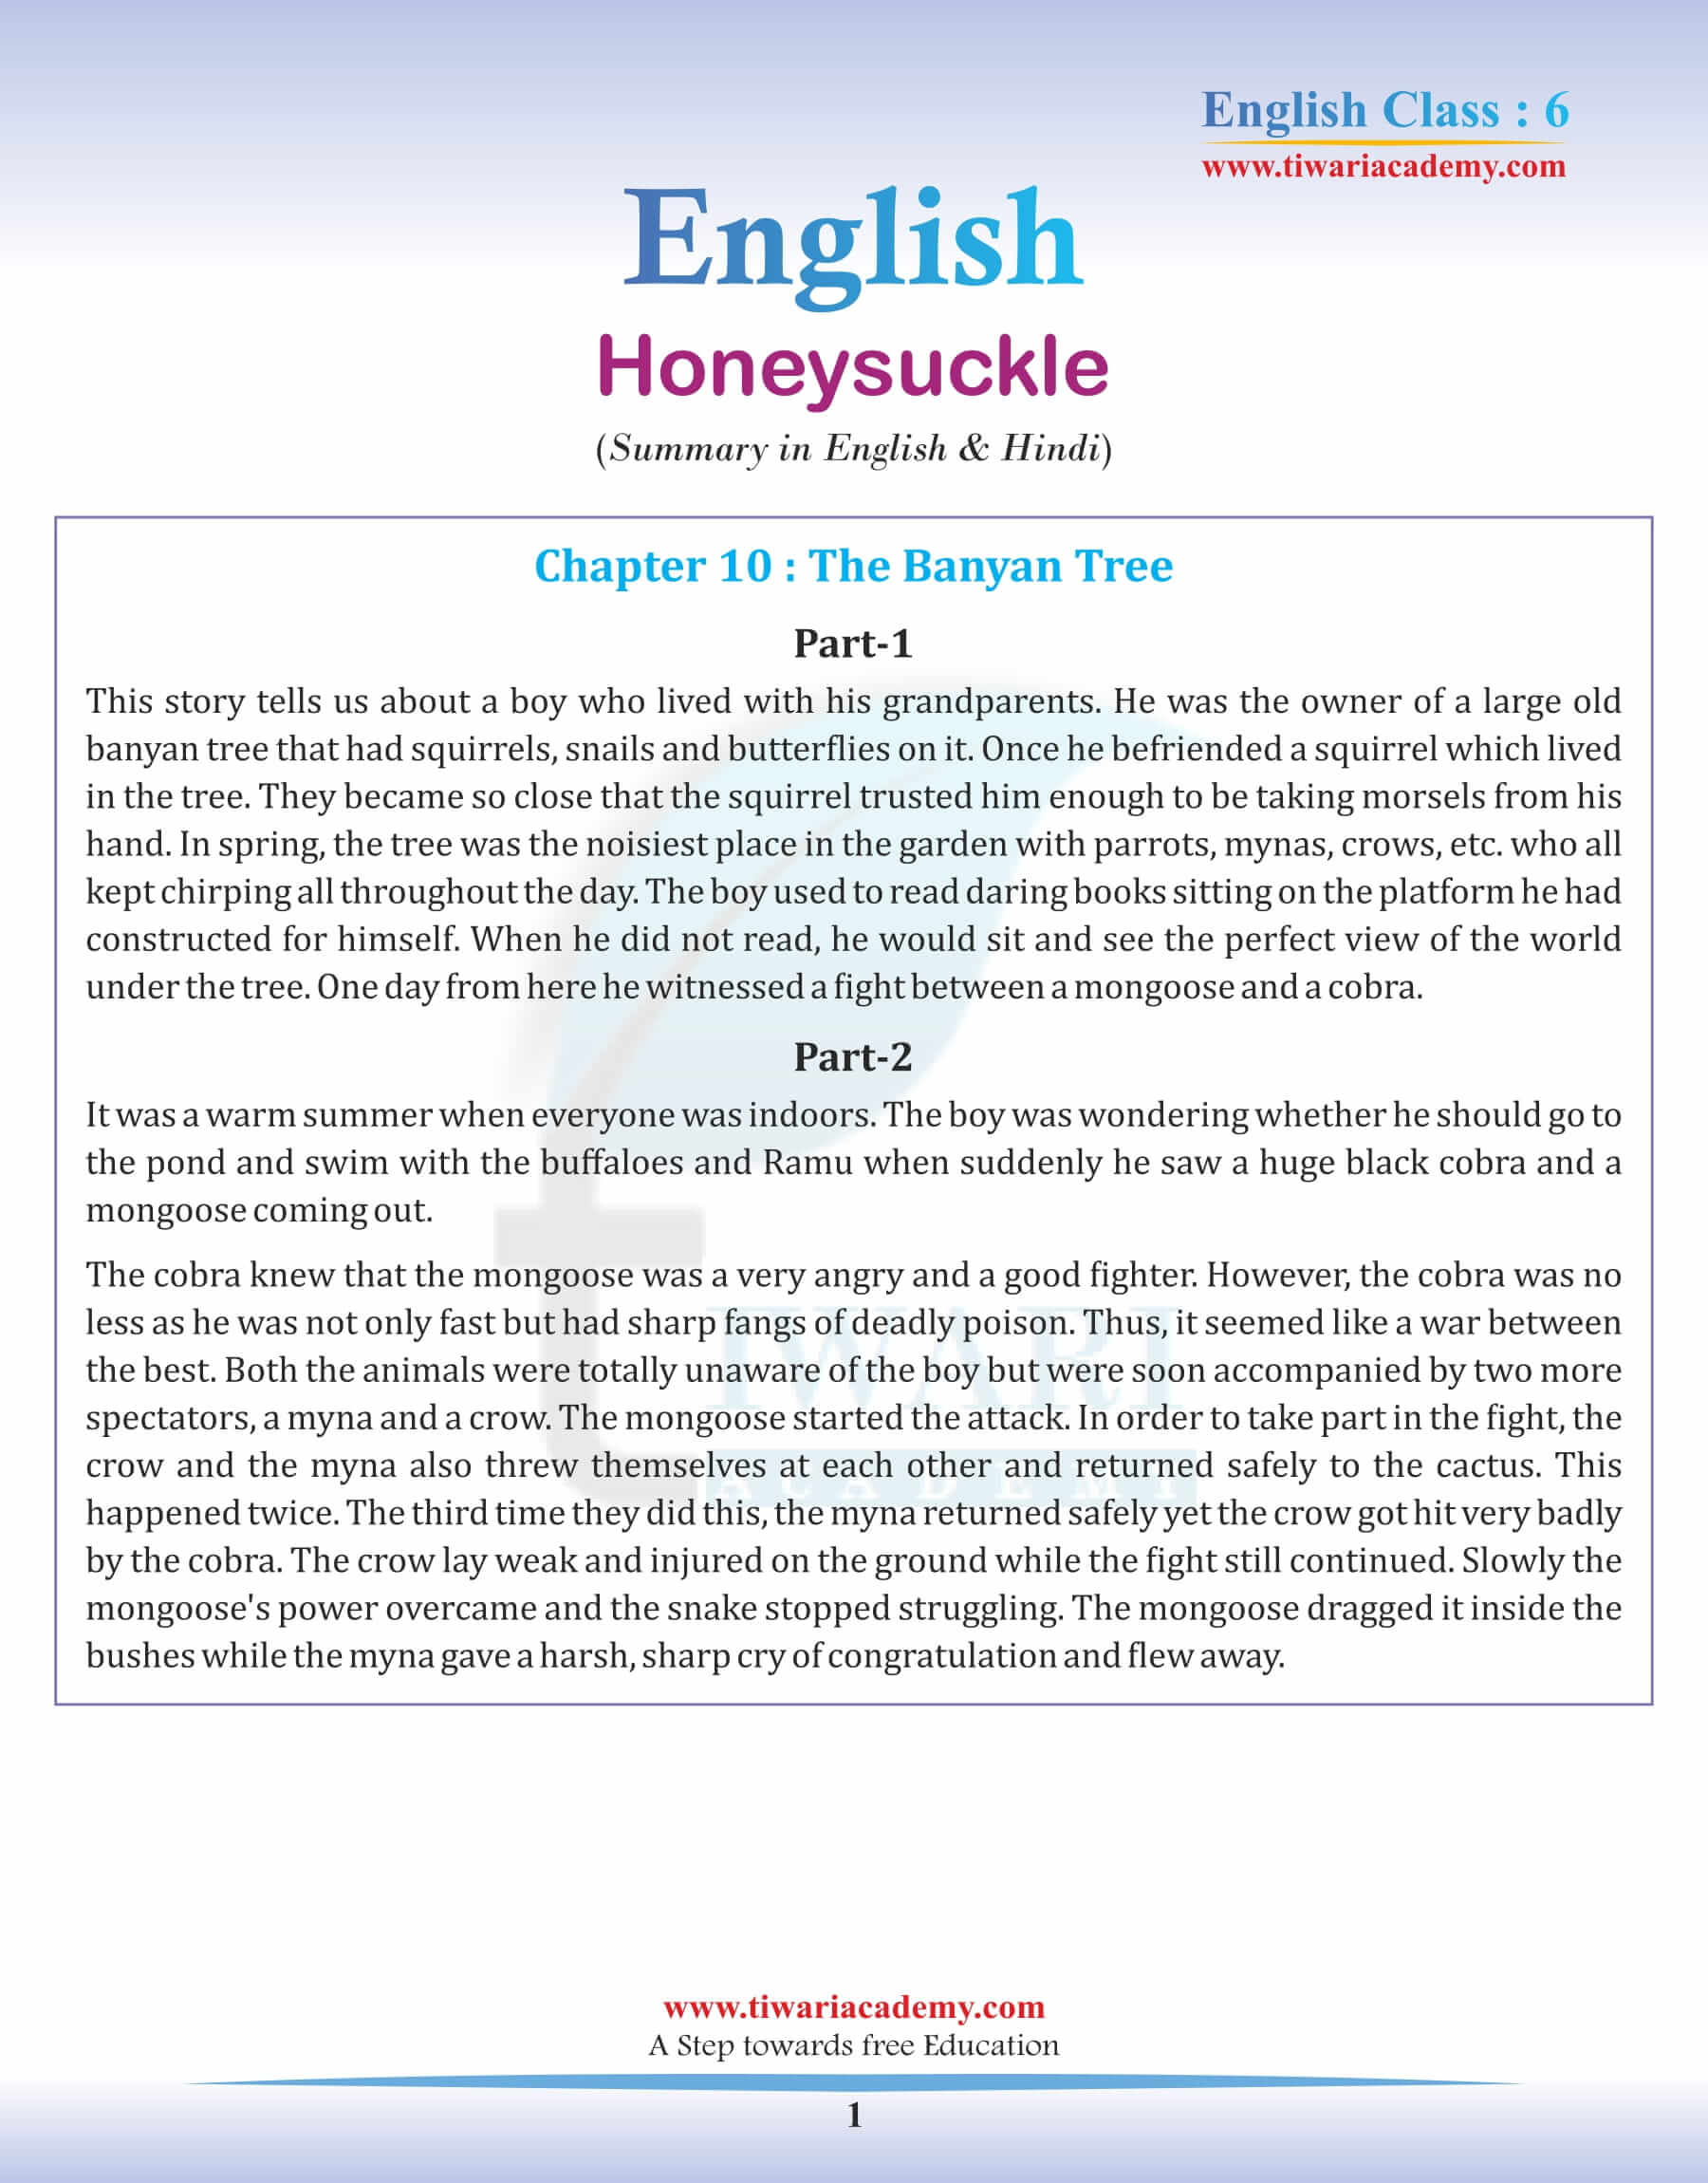 Class 6 English Chapter 10 Summary in Hindi and English